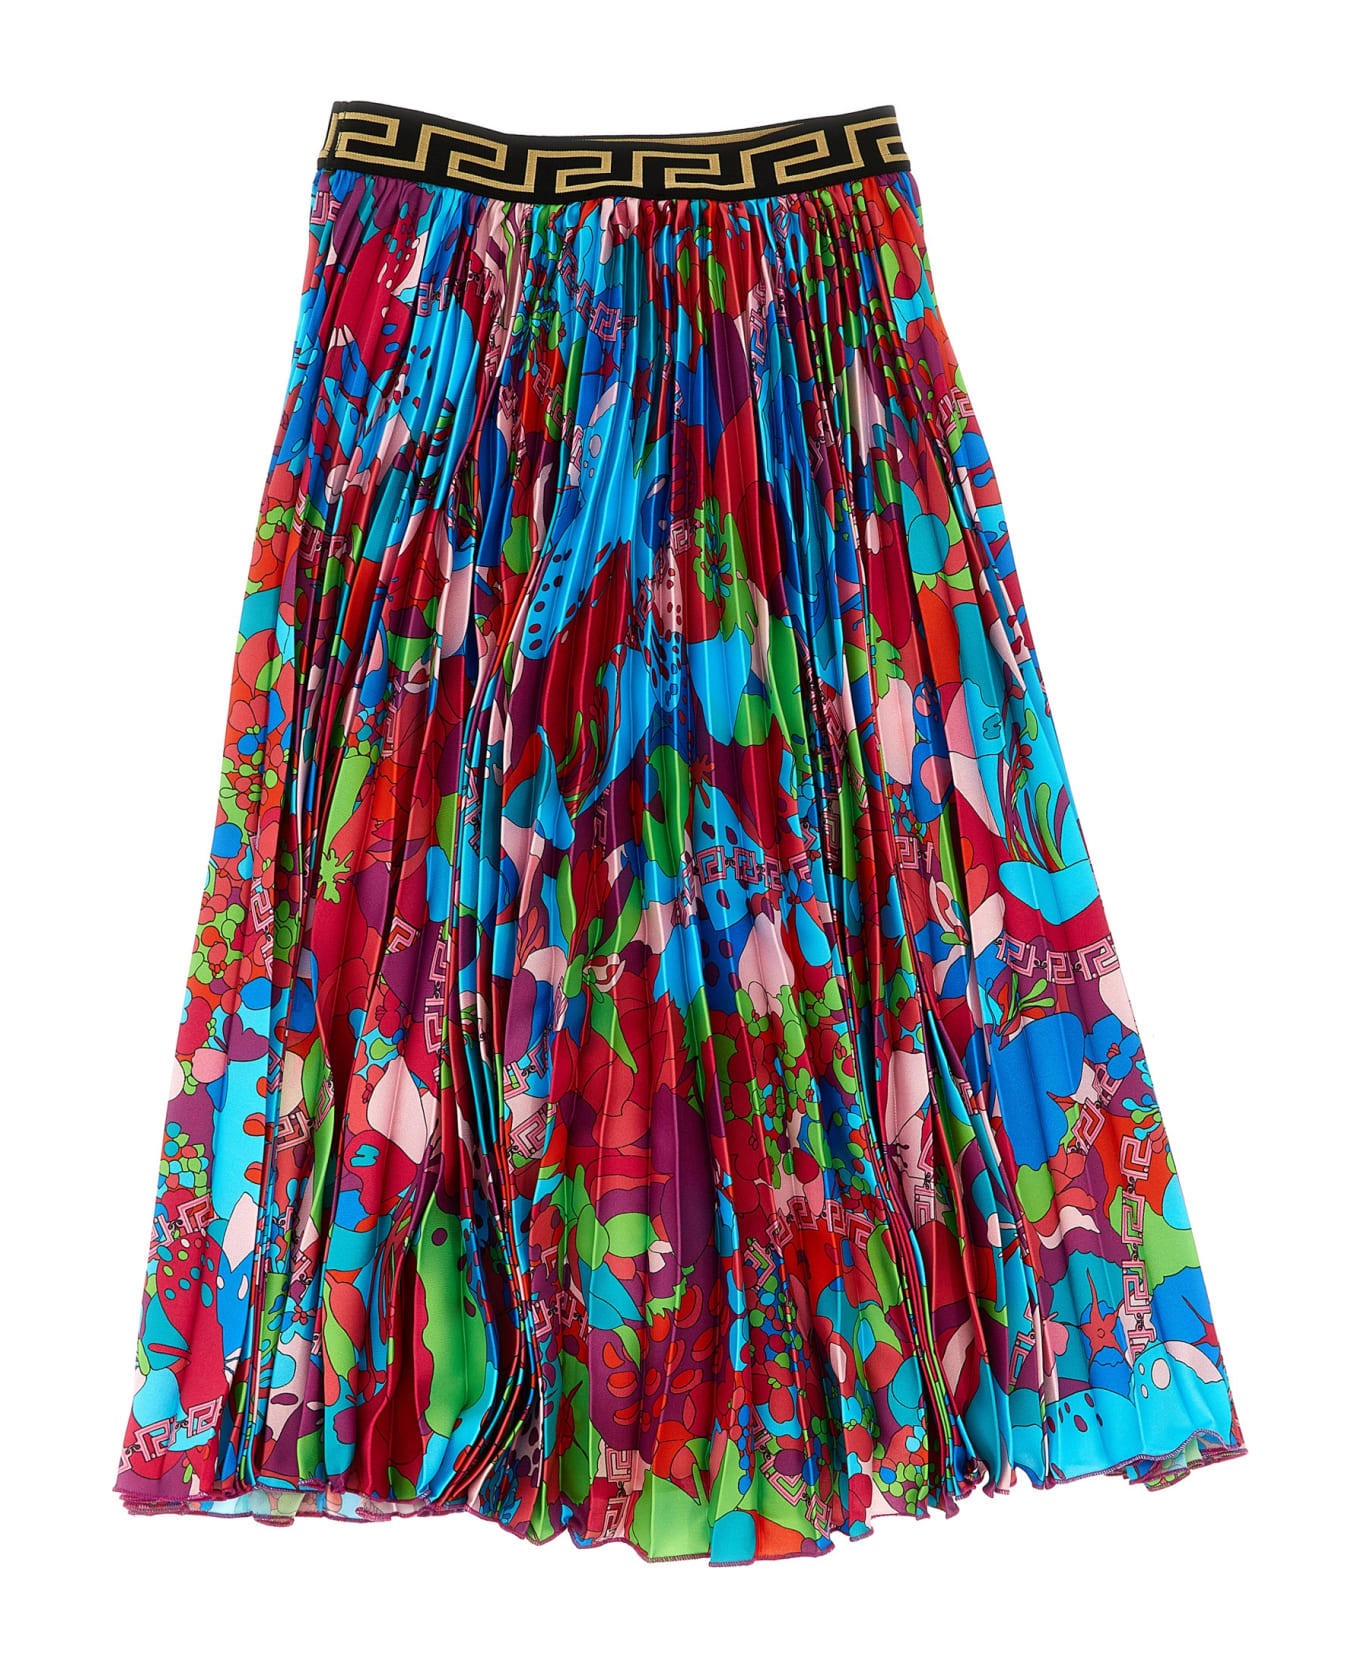 Versace Floral Skirt - Multicolor ボトムス